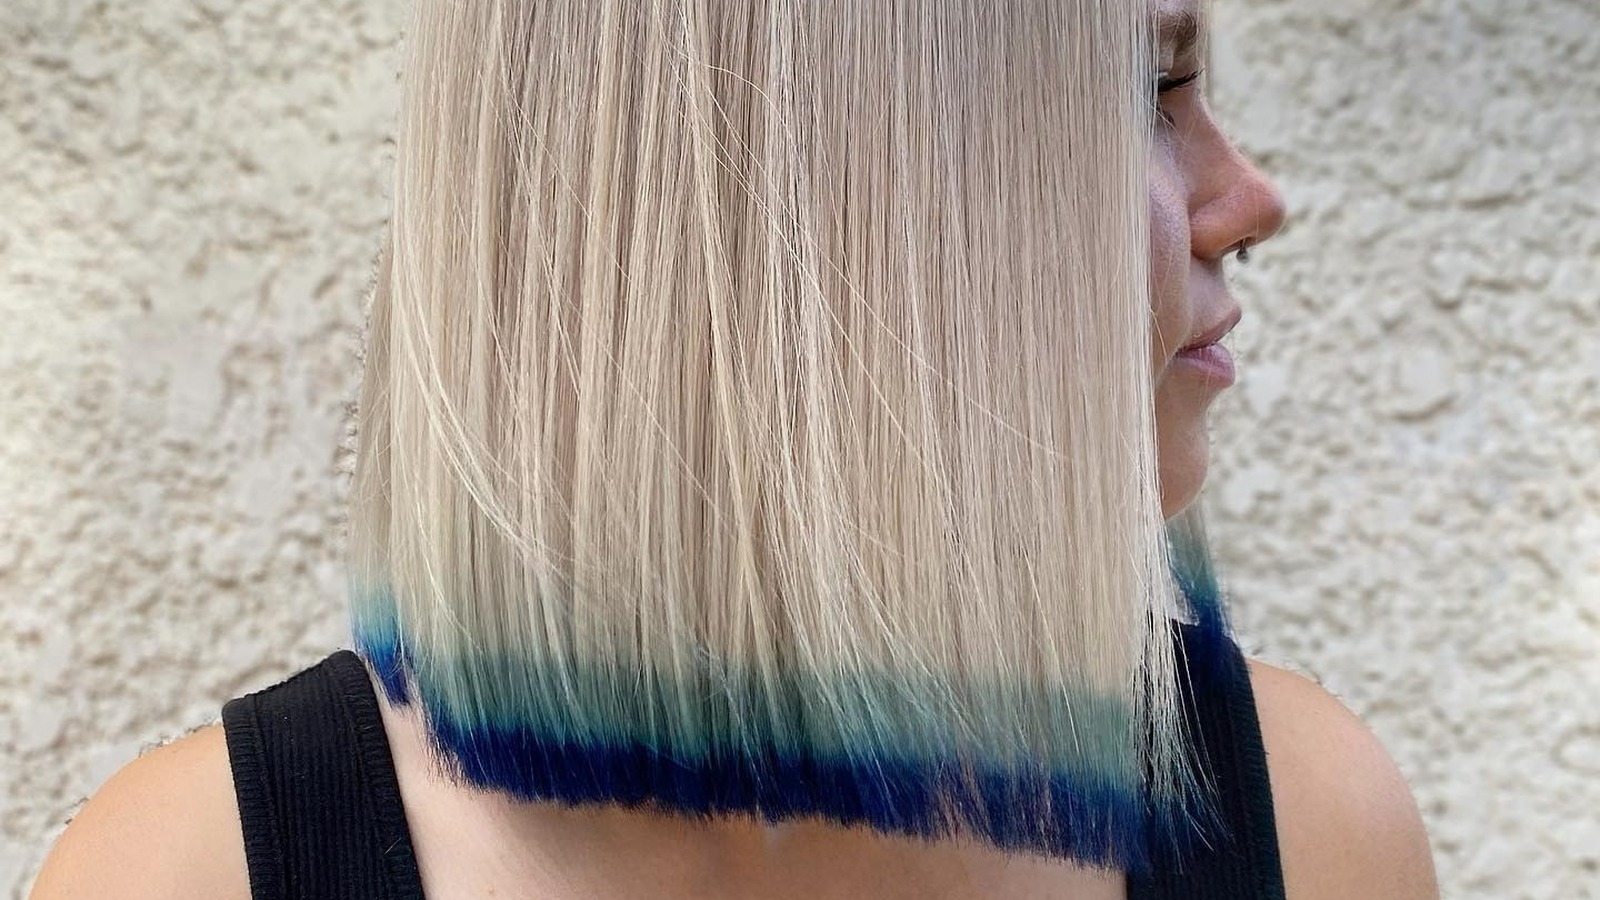 How to Achieve a Blue Dip Dye Look on Pinterest - wide 2